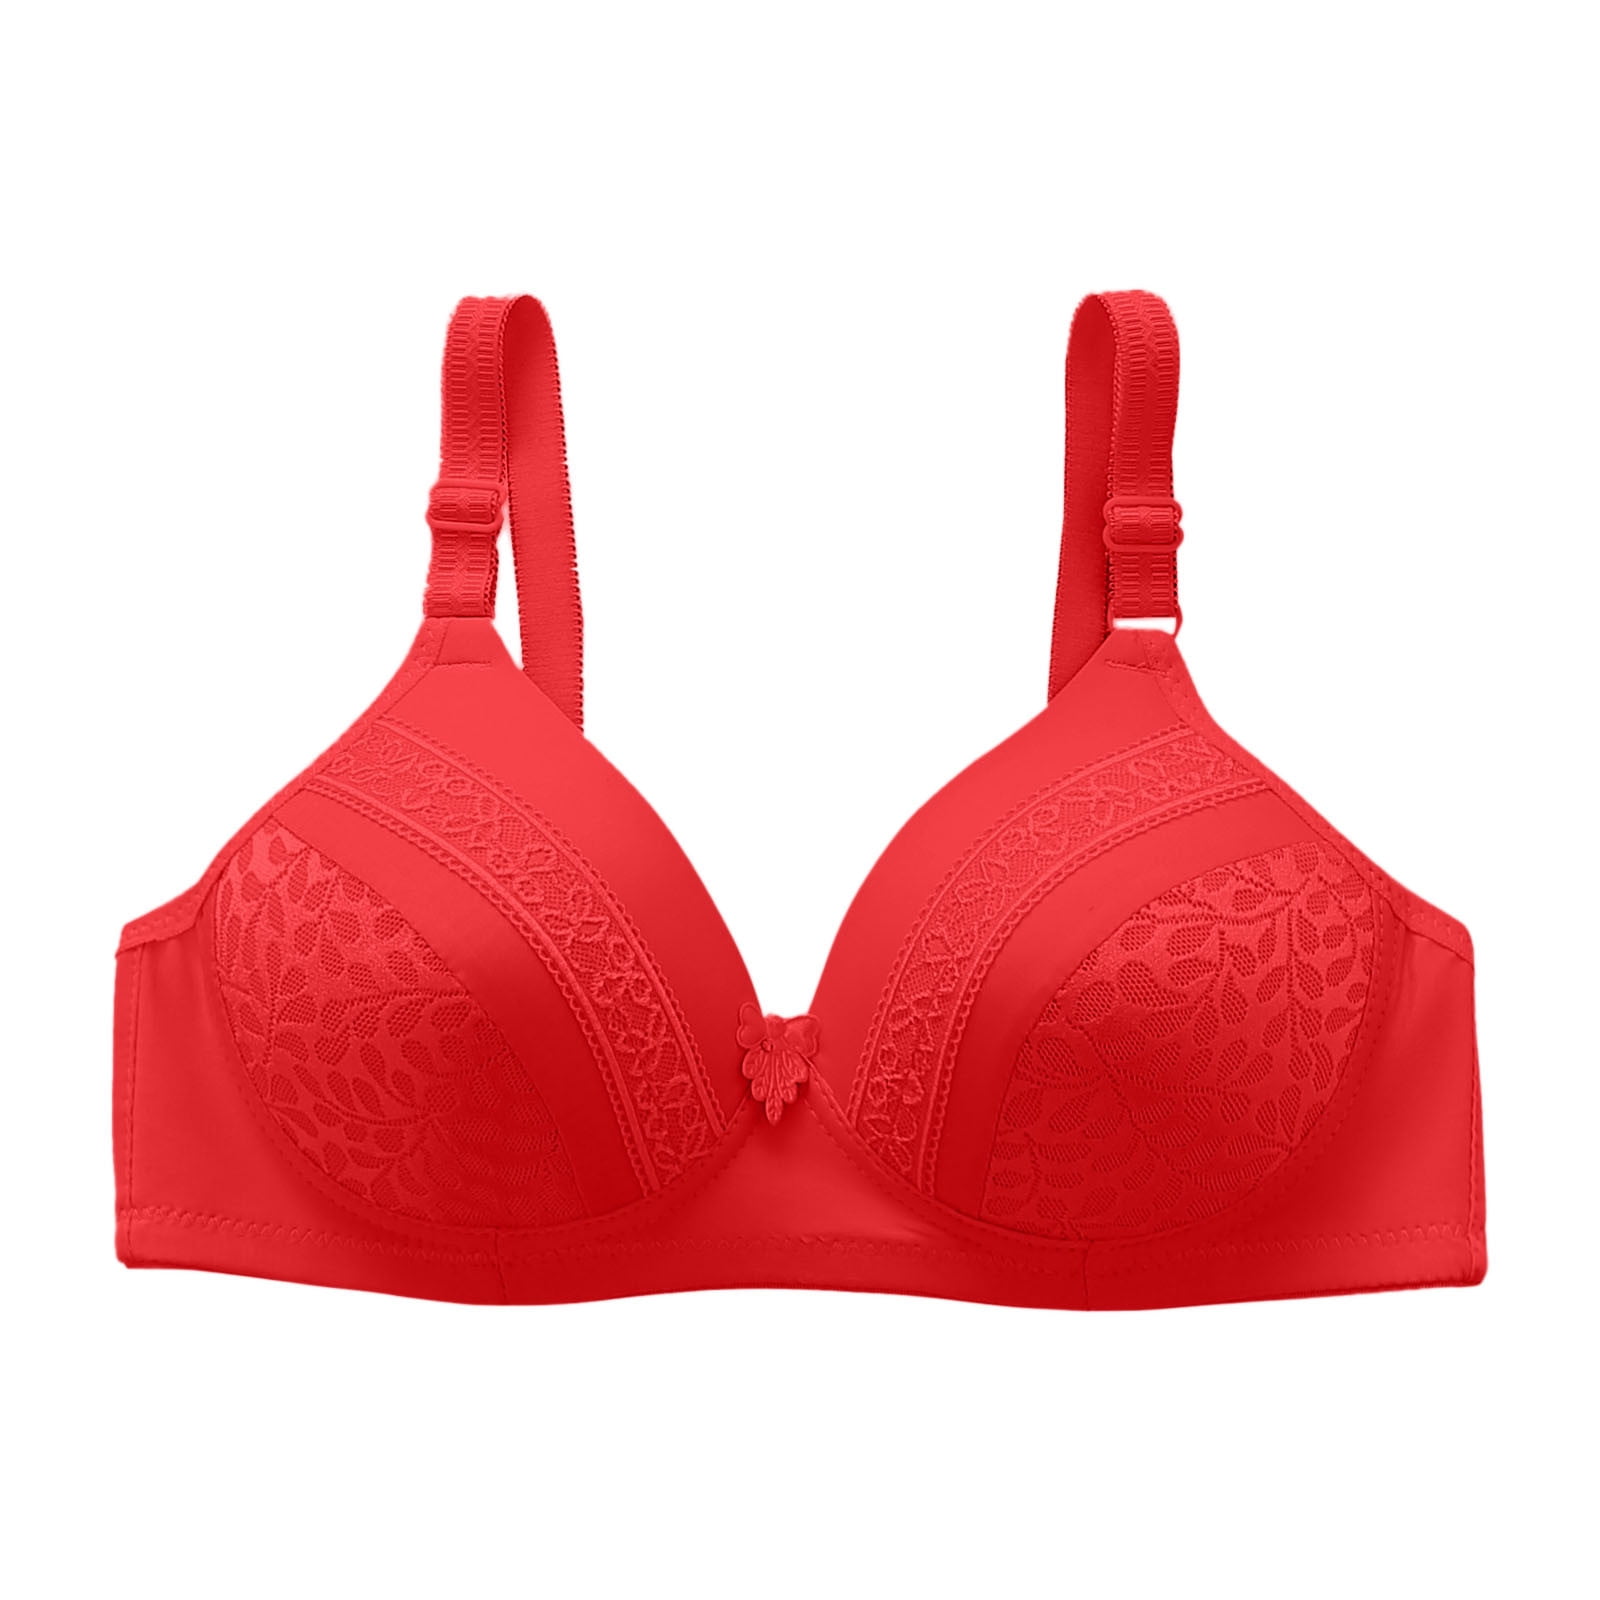 CAICJ98 Lingerie for Women Women's Filifit Sculpting Uplift Bra Fashion  Deep Cup Bra Full Back Coverage Hide Smooth Bra Red,B 